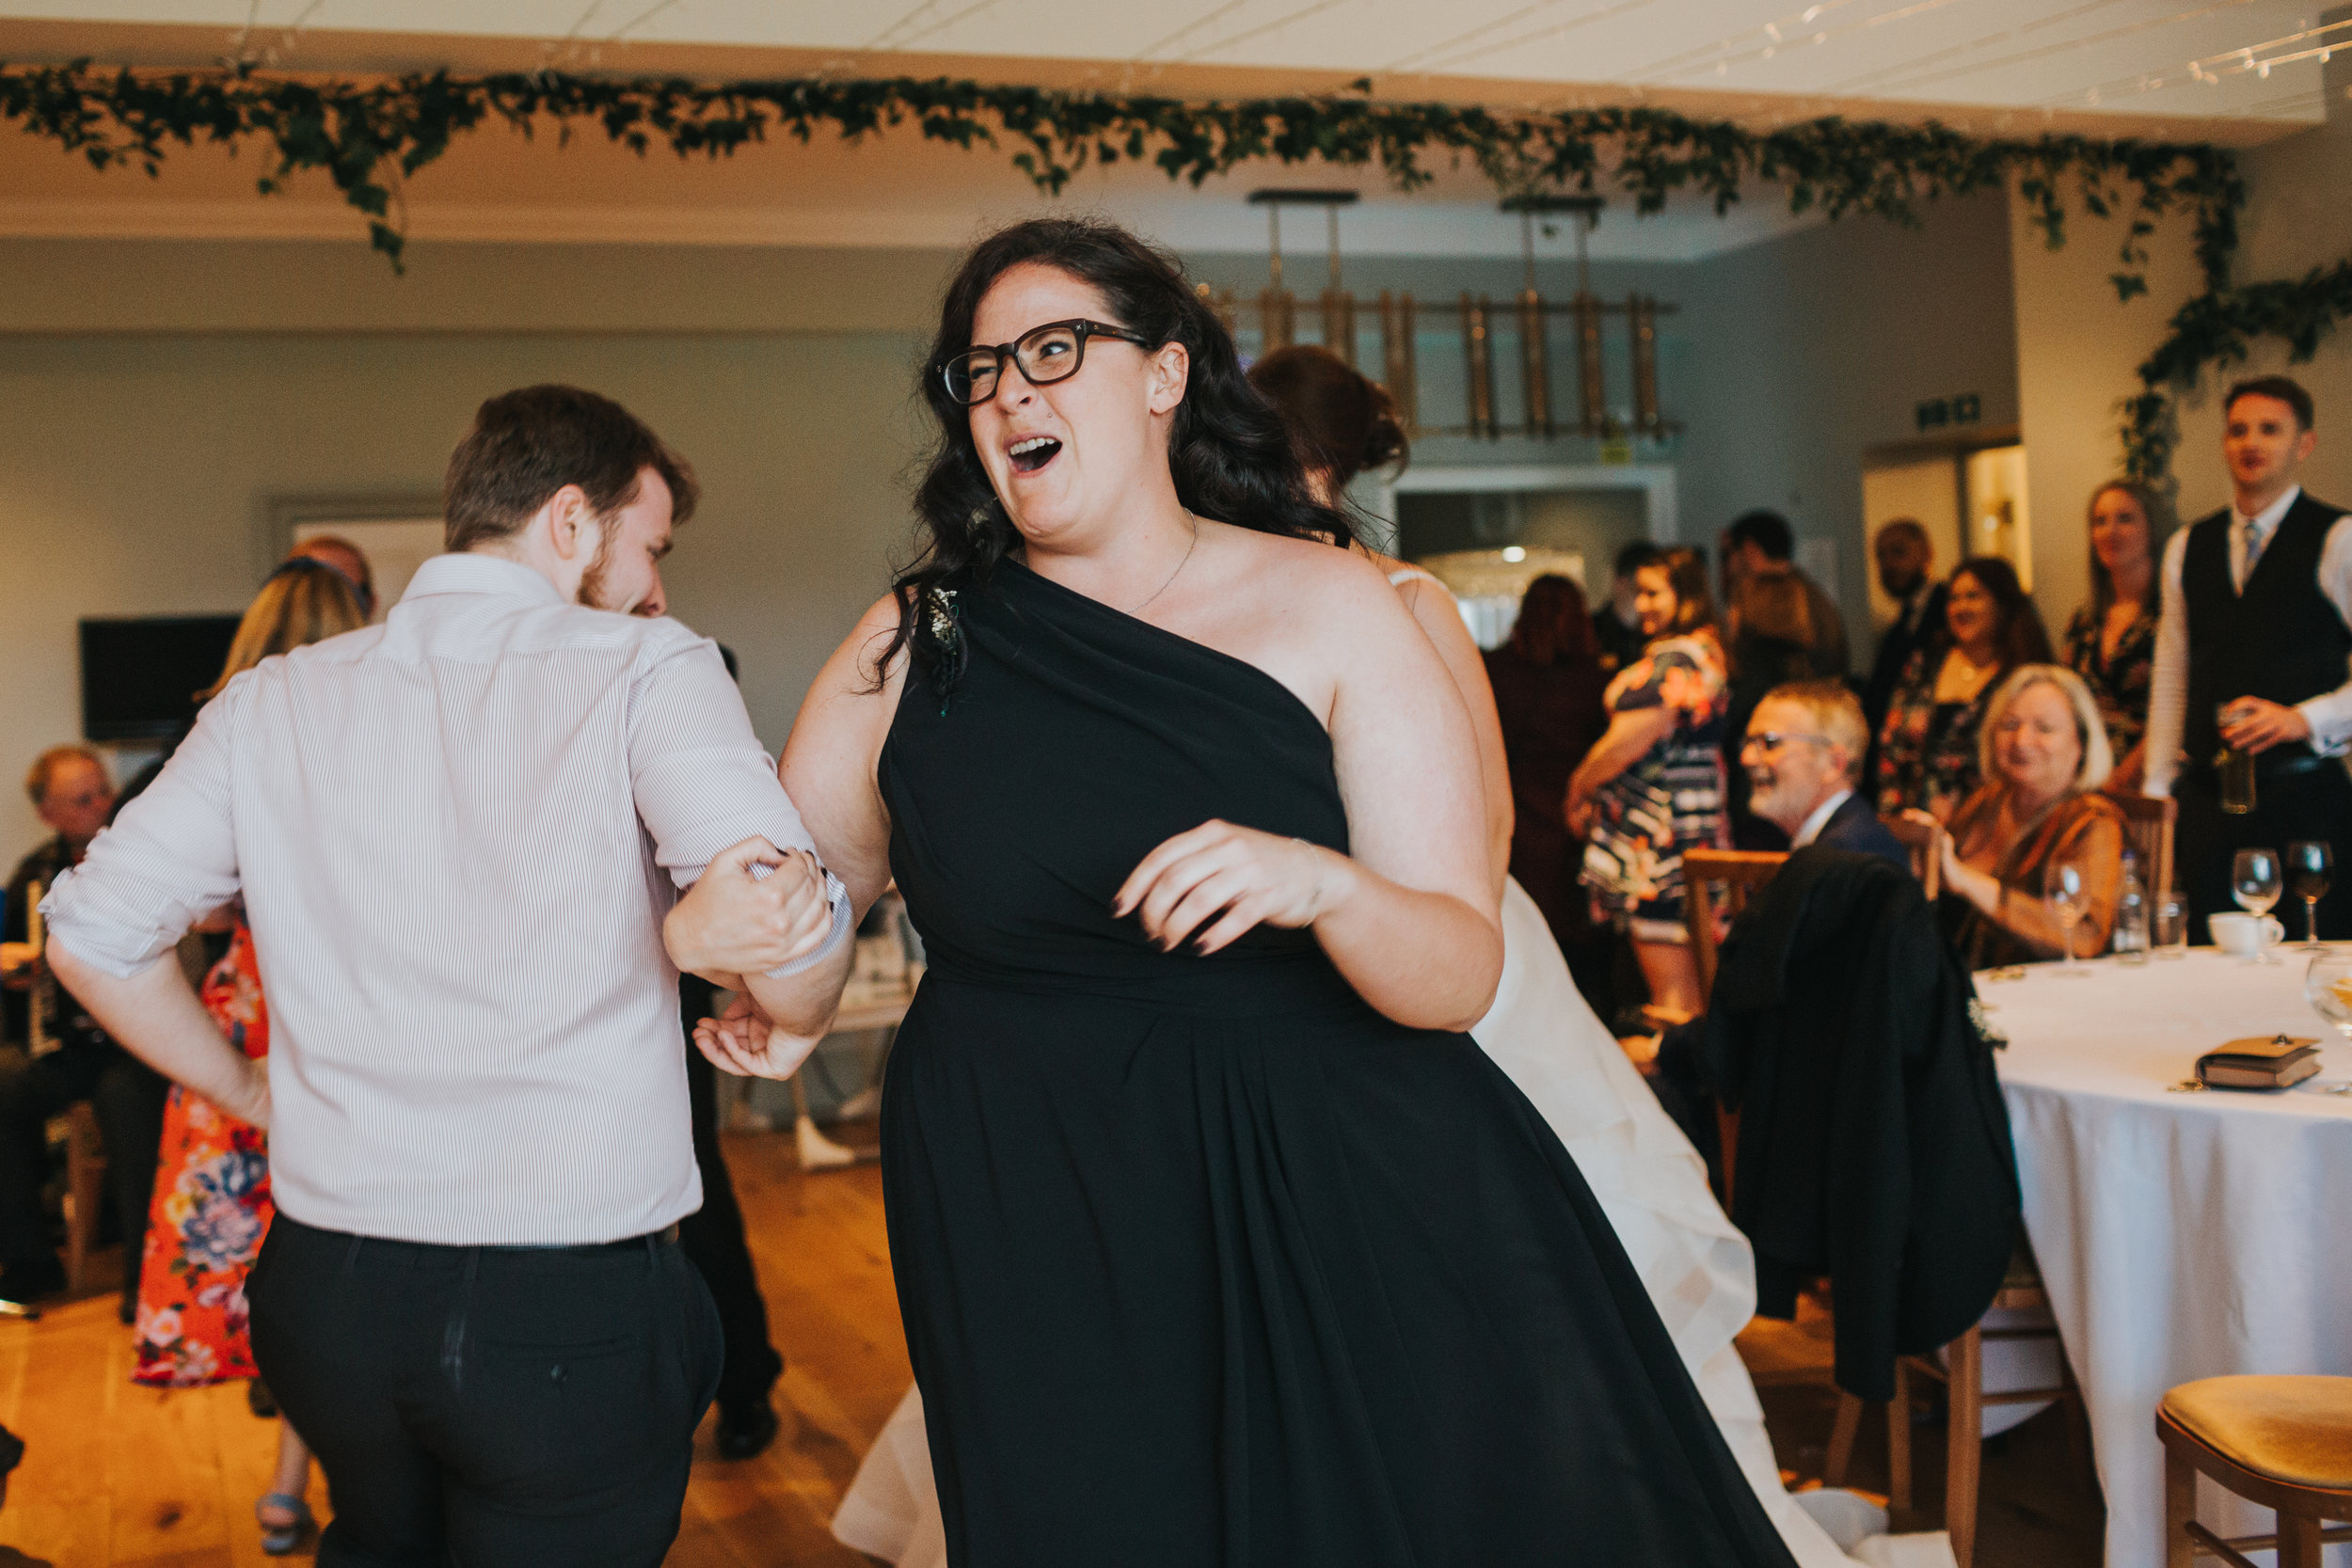 Wedding guest pulls funny face while dancing. 